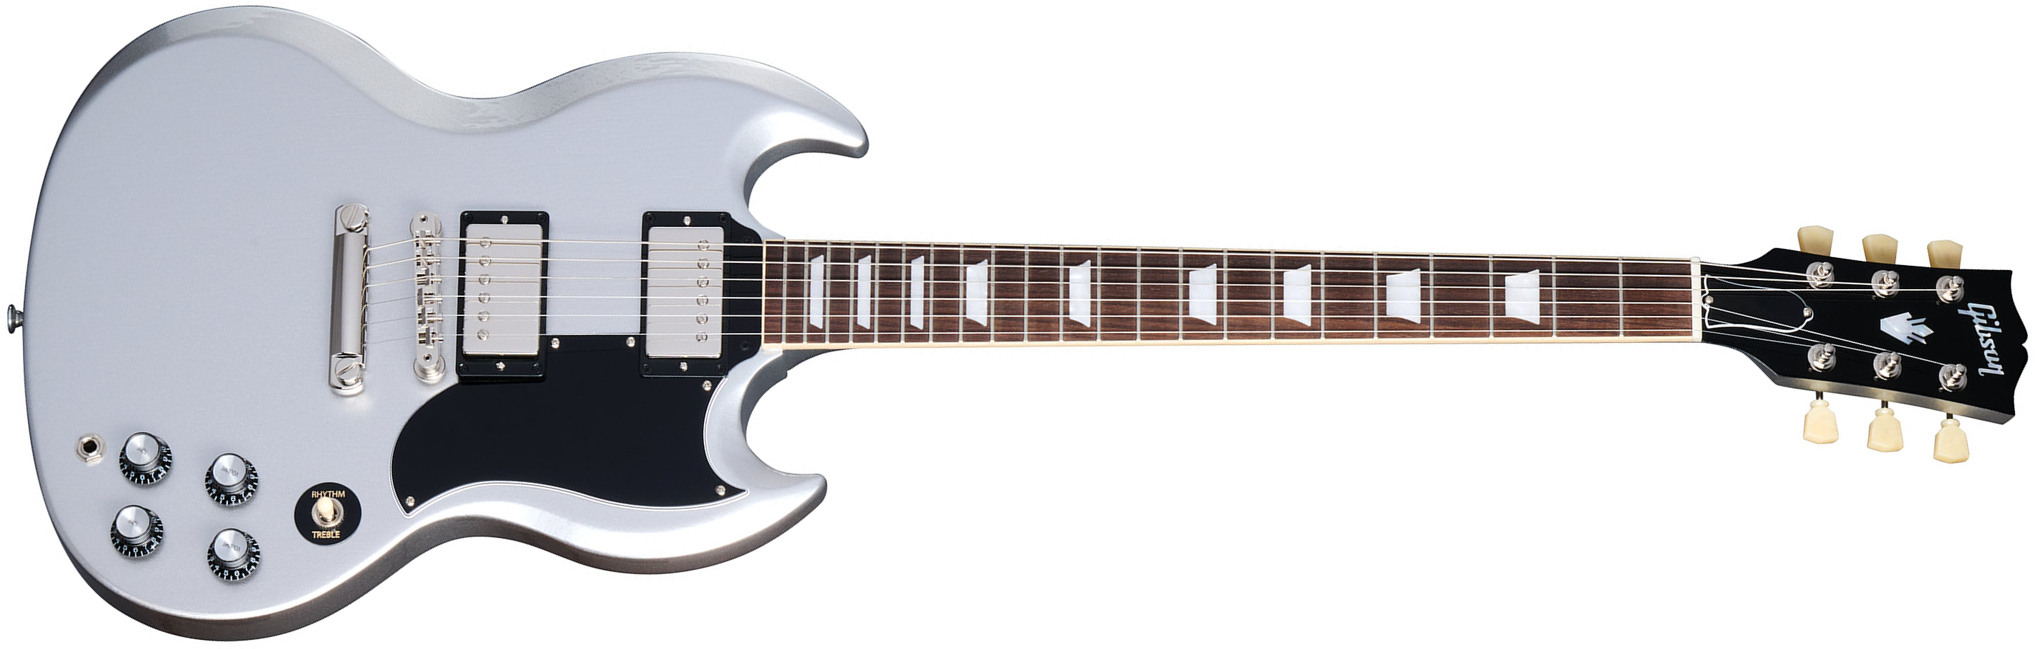 Gibson Sg Standard 1961 Custom Color 2h Ht Rw - Silver Mist - Double cut electric guitar - Main picture